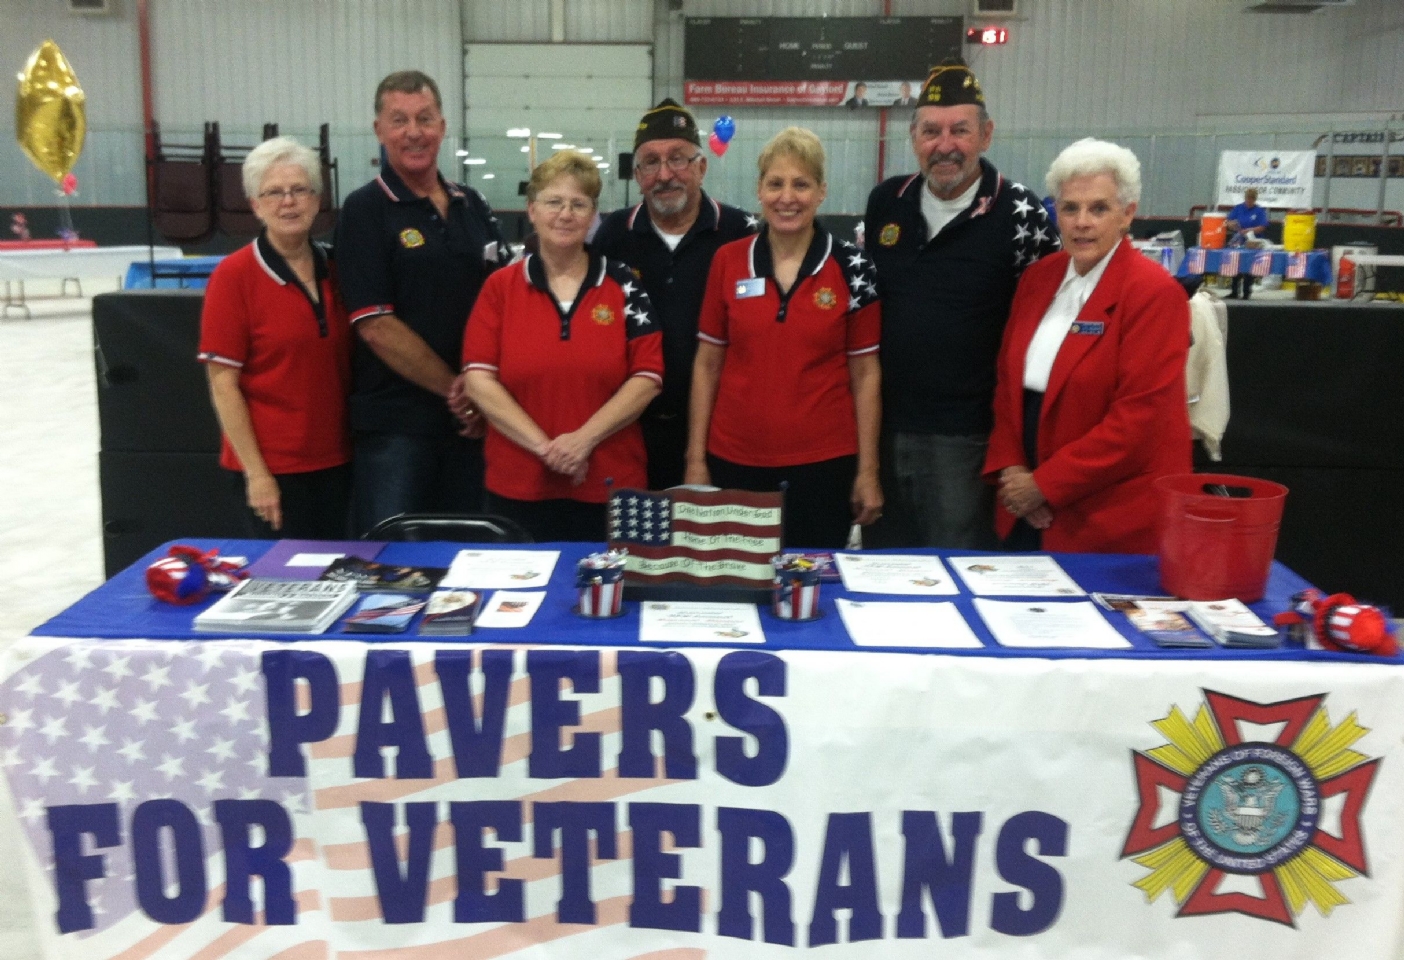 VFW and Auxiliary members distribute paver applications during this event.